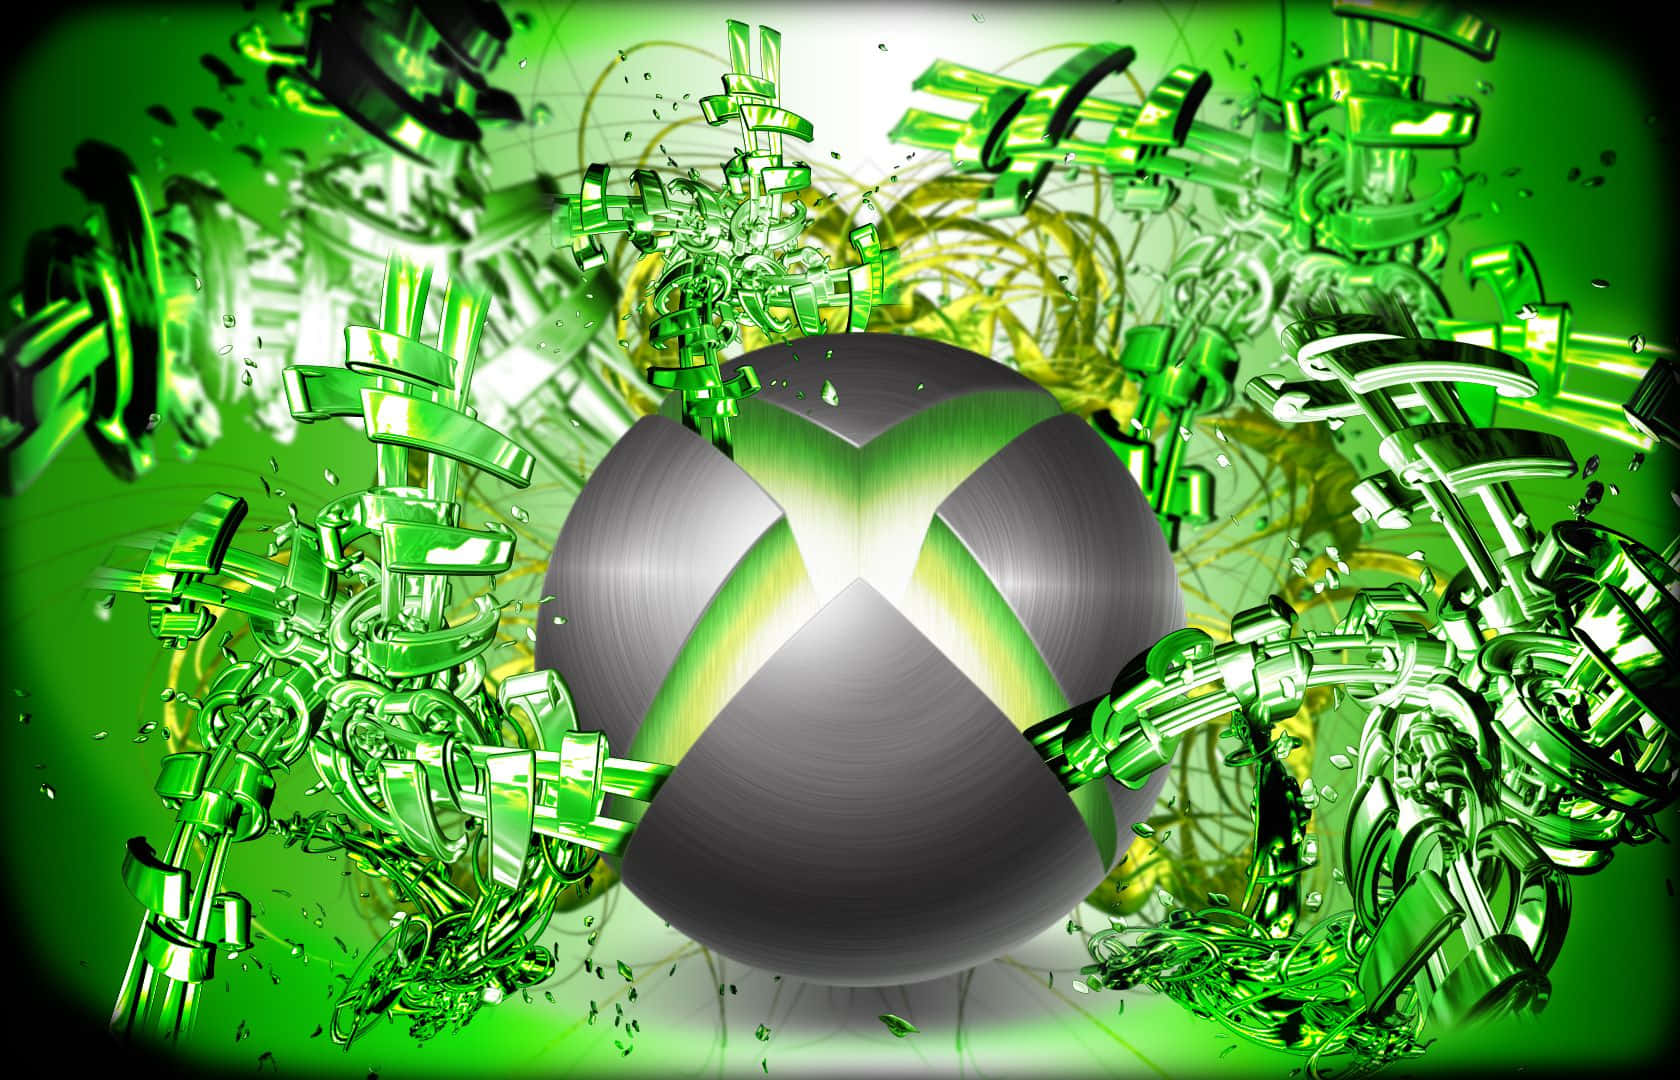 Enjoy The Best Of Gaming With The Cool Xbox Console